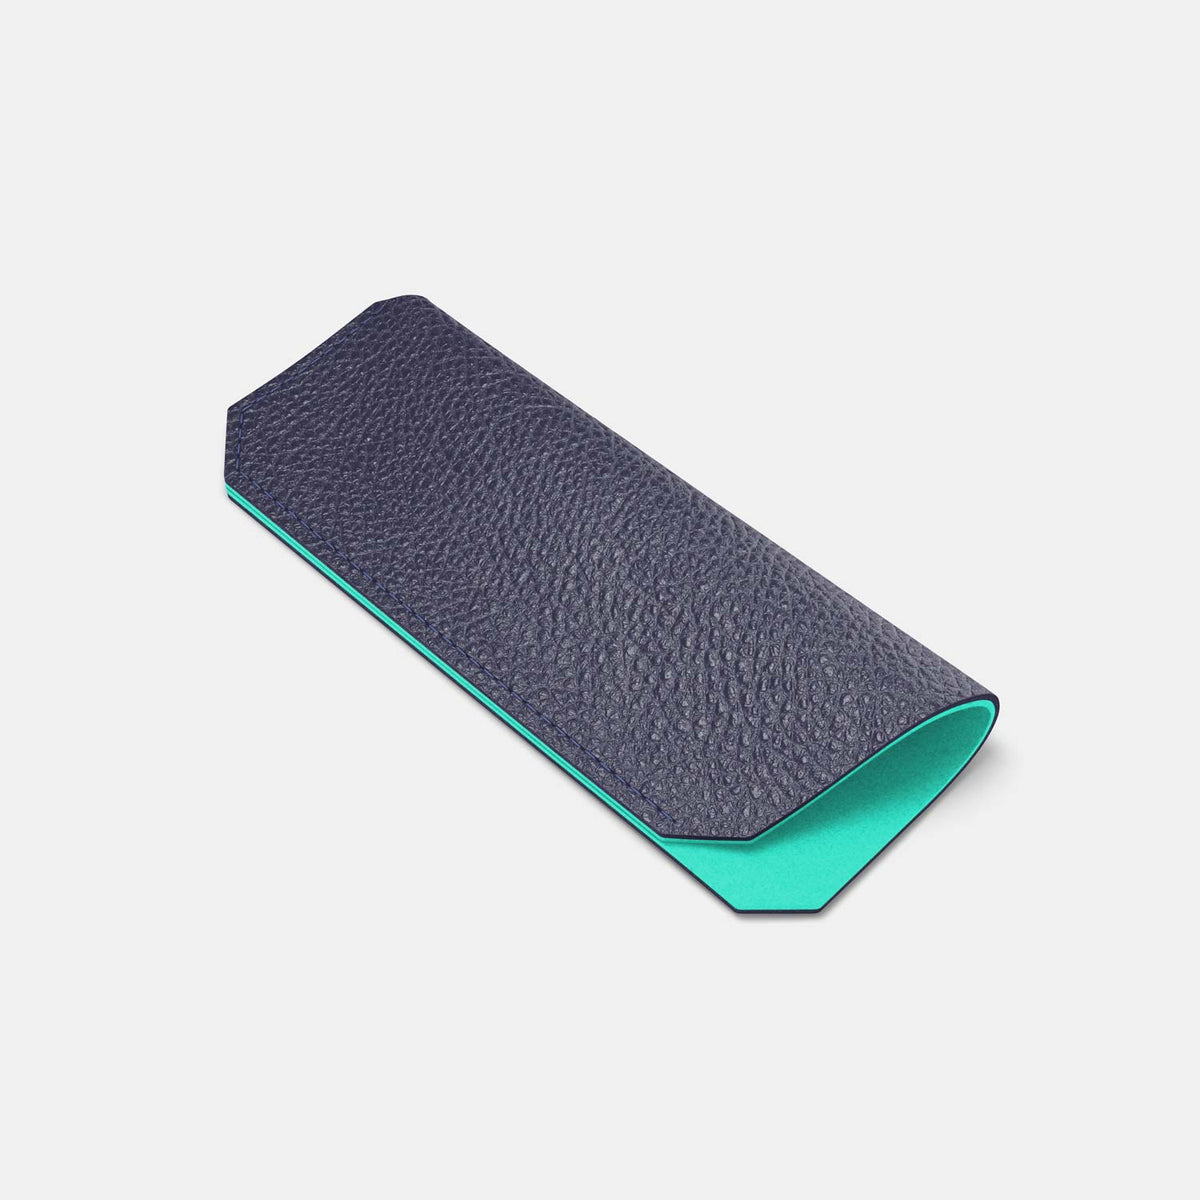 Leather Glasses case - Navy Blue and Mint - RYAN London